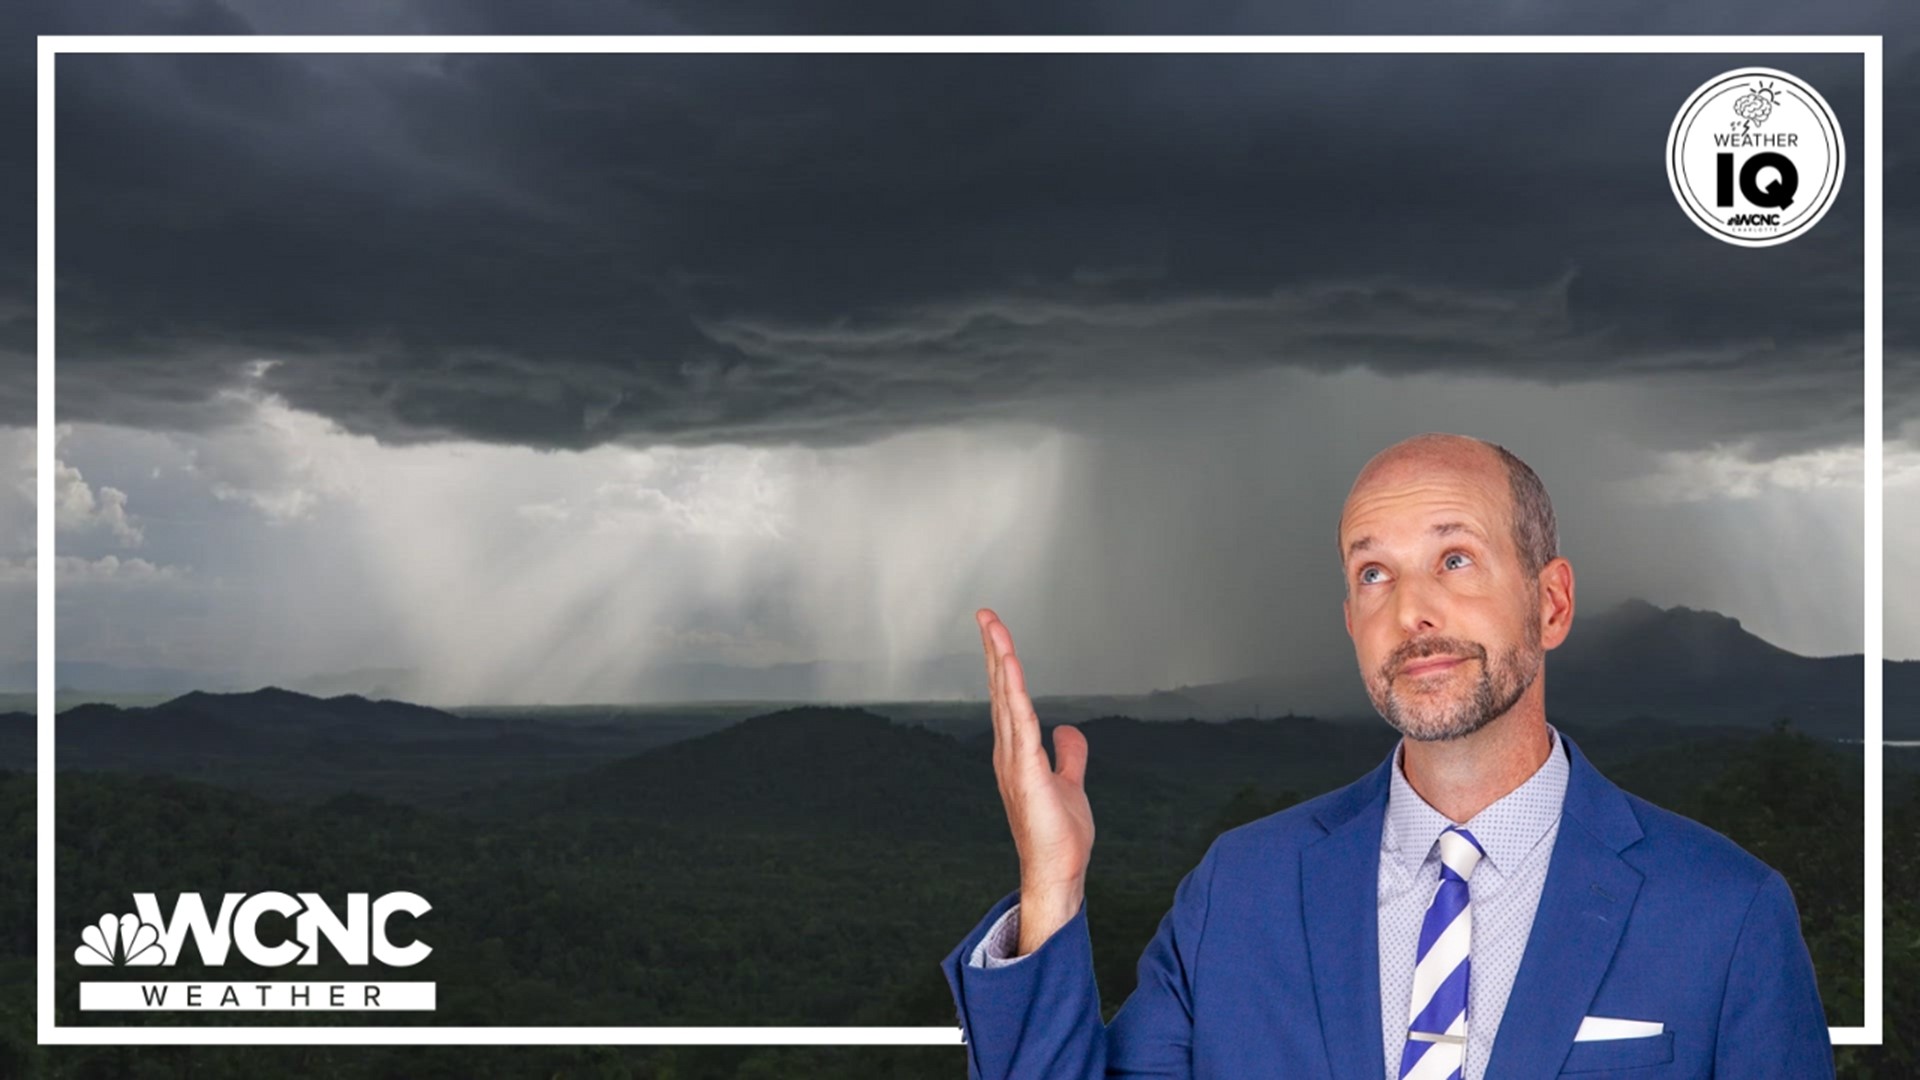 Chief Meteorologist Brad Panovich shares a vocabulary lesson of severe weather words it's important to know.